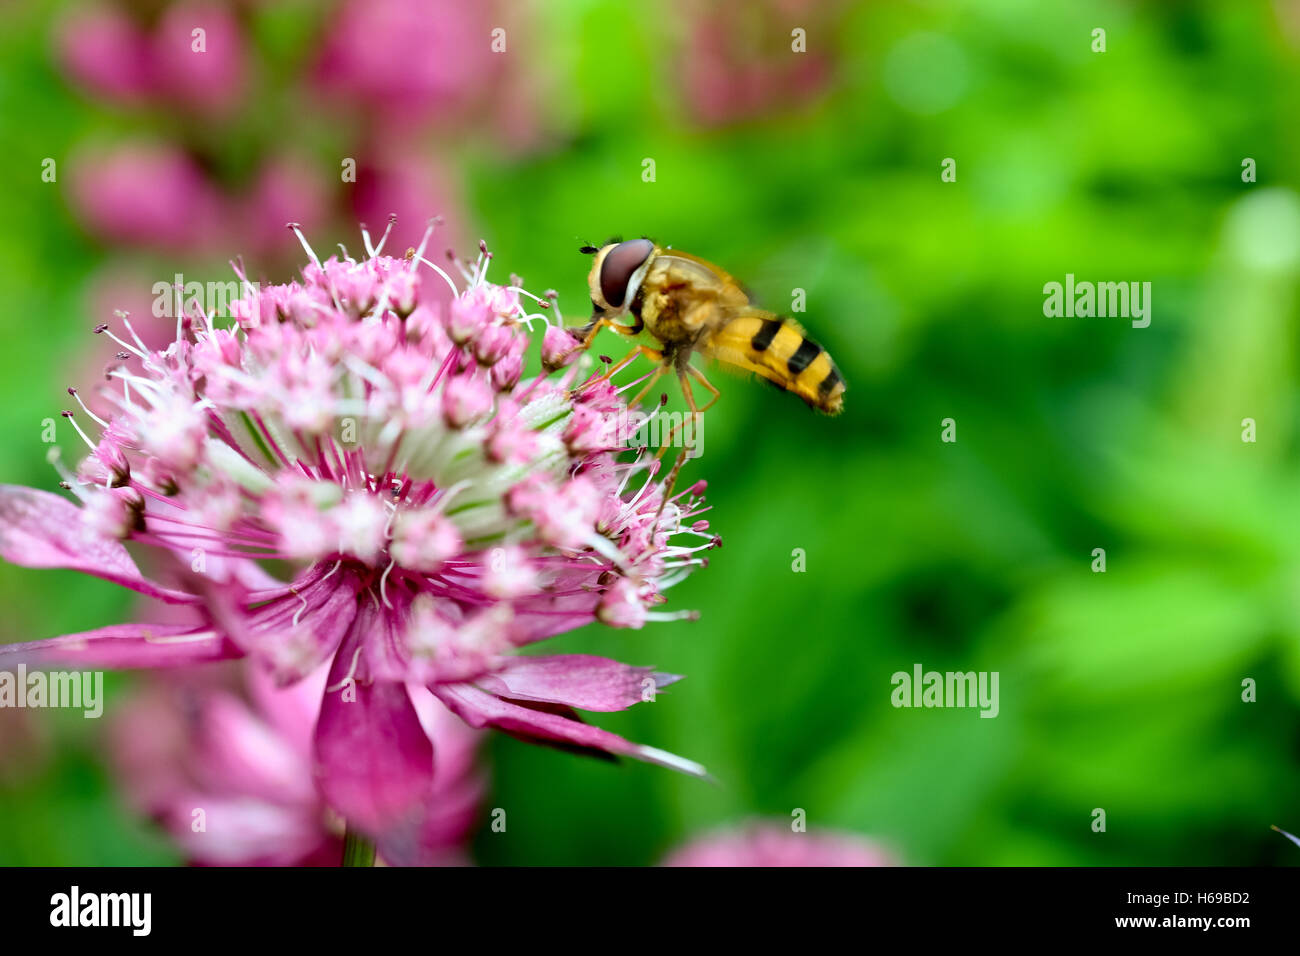 Bug/insect yellow and black landing on pink flower Stock Photo